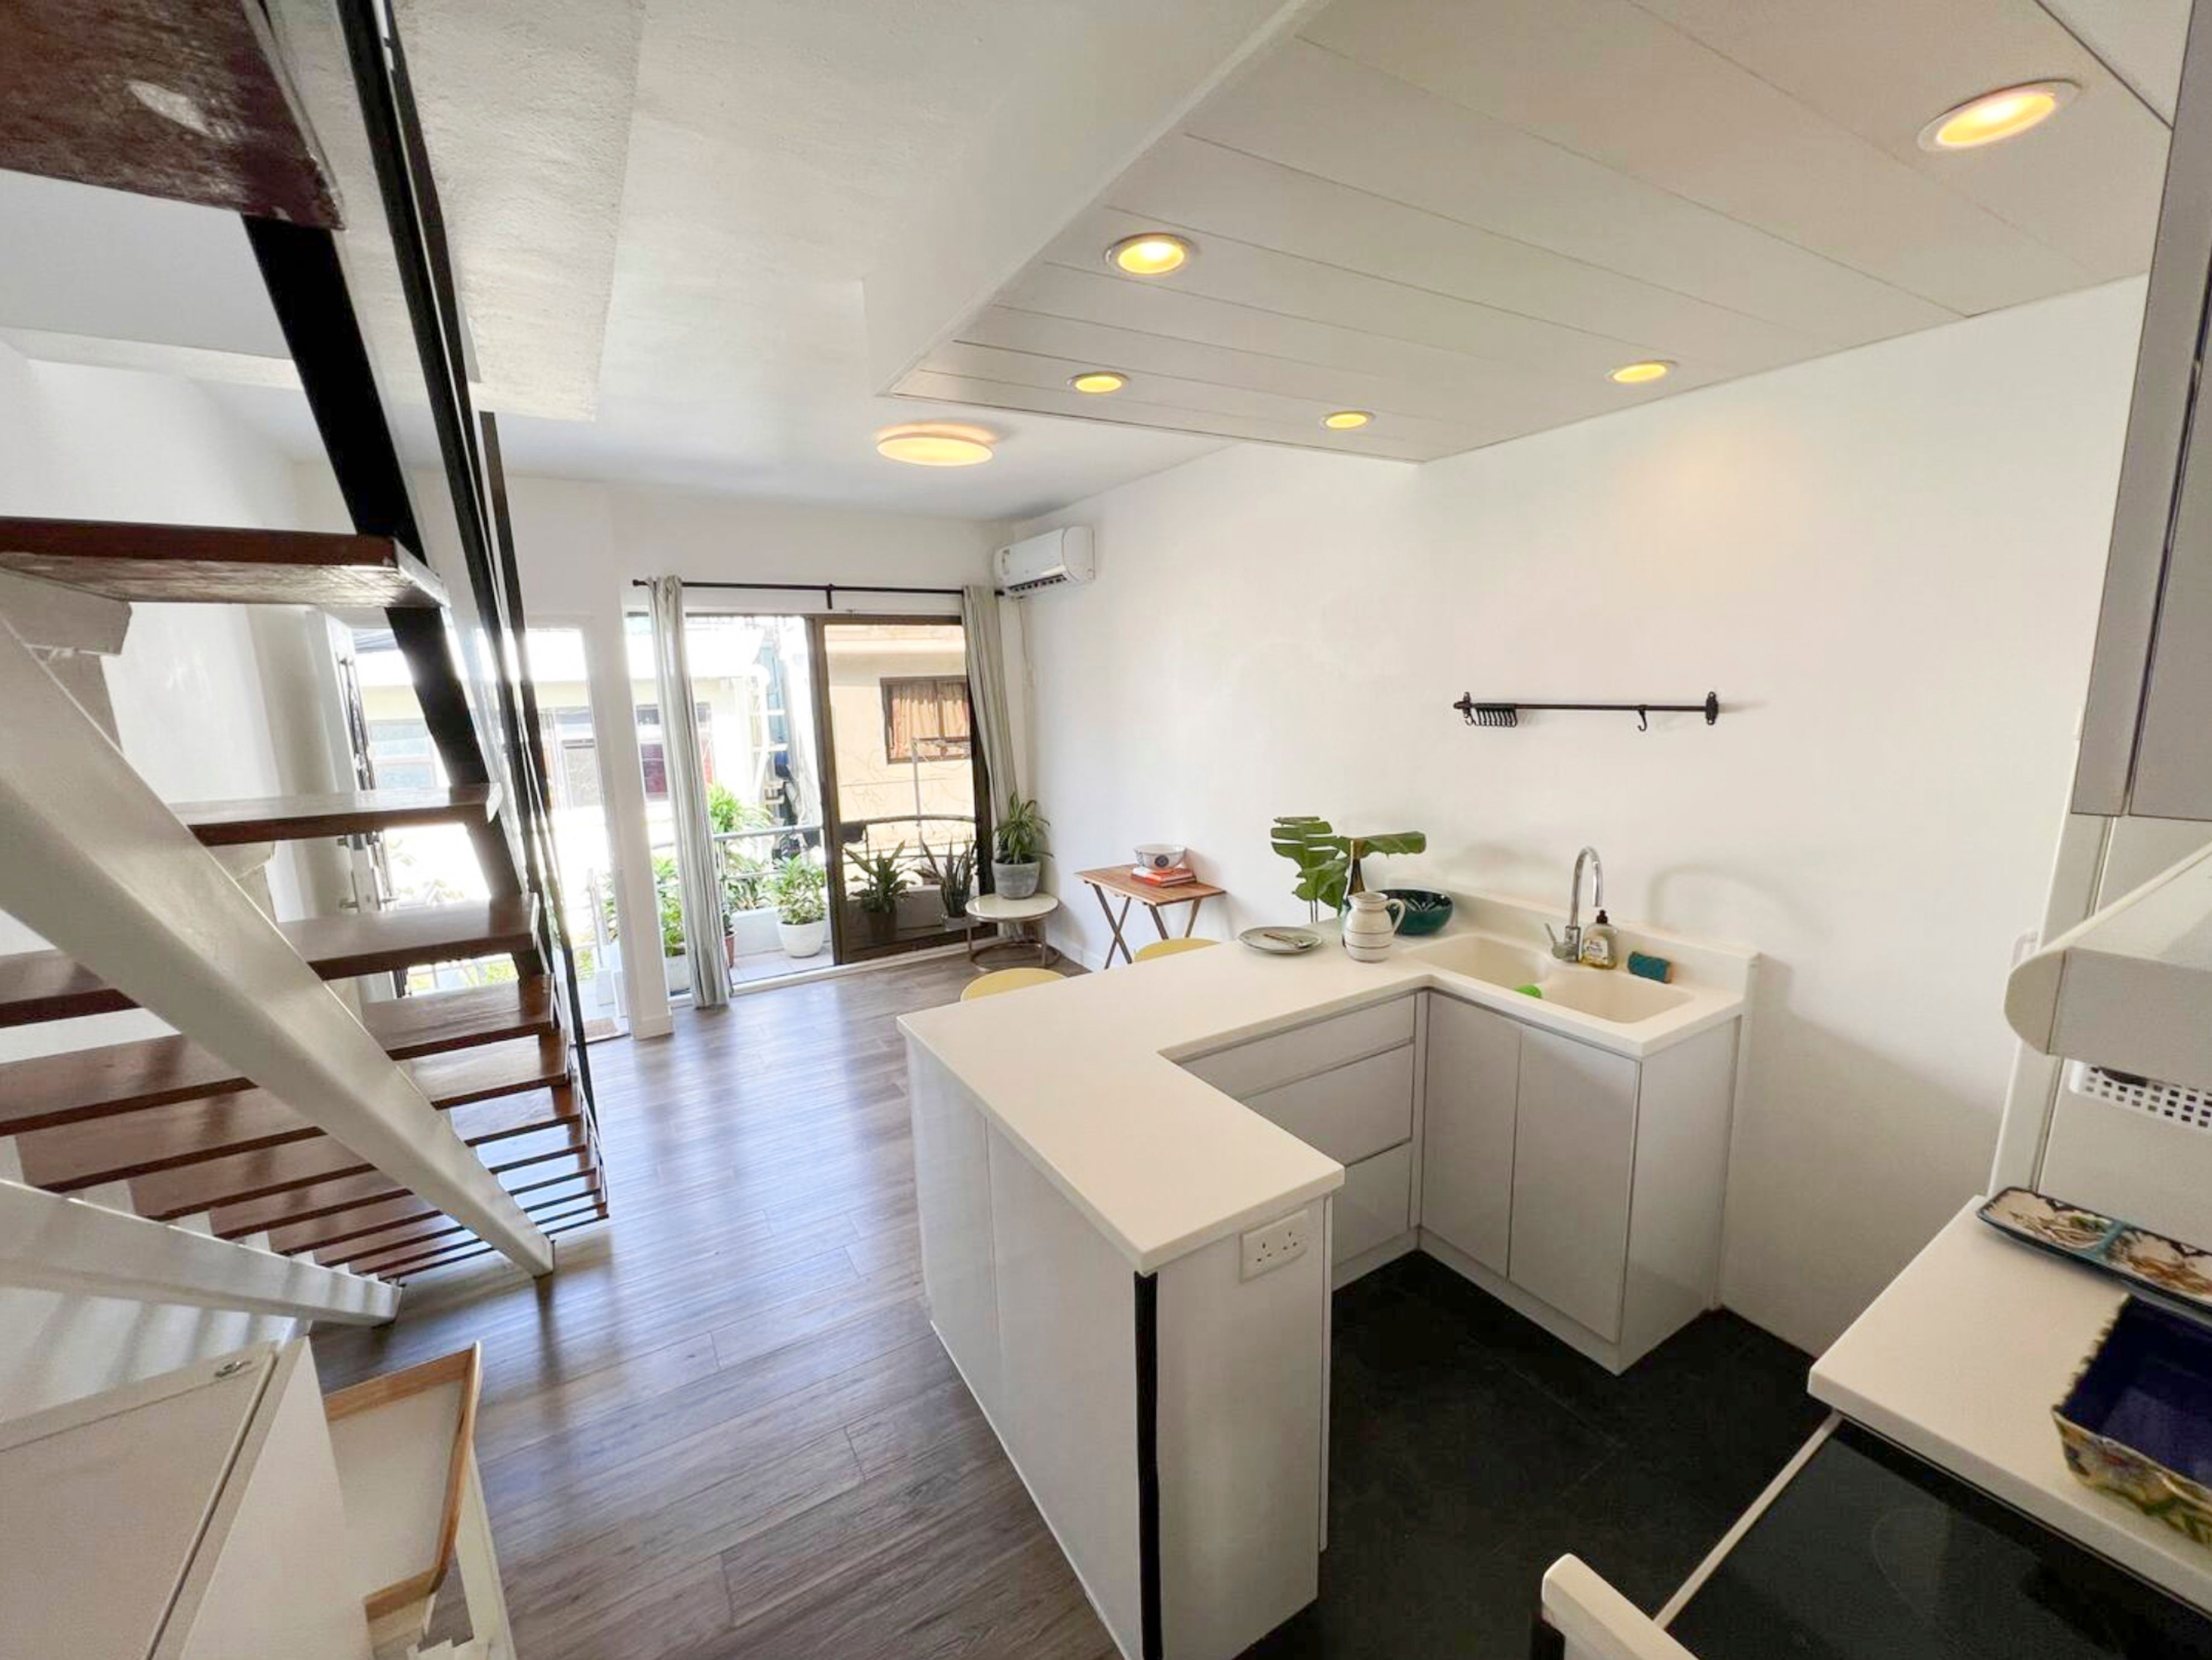 <p><strong>Bed & bath:</strong> 1 bedroom, 1.5 baths<br> <strong>Top amenities:</strong> Rooftop with ocean views, beach access, village location</p> <p>Need a break from the busy city? You’ve come to the right place. About a 20-minute drive from Central, Shek O village is known for its photogenic beaches, low-key restaurants, and hiking routes like Cape D’Aguilar and Dragon’s Back. Whether relaxing by the water or hitting the trails, this one-bedroom beach house will be a refuge of relaxation, thanks to its open-plan kitchen and dining room with a terrace, boho-chic living room, and panoramic rooftop. The hosts have thought of literally everything, offering beach essentials, exercise gear, bikes, a ping pong table, a grill, and even a Dyson hair dryer. Better yet, this house is one of the few in Hong Kong that welcomes dogs—and there’s even a dog-friendly beach around the corner.</p> $175, Airbnb (starting price). <a href="https://www.airbnb.com/rooms/759144758541368736">Get it now!</a><p>Sign up to receive the latest news, expert tips, and inspiration on all things travel</p><a href="https://www.cntraveler.com/newsletter/the-daily?sourceCode=msnsend">Inspire Me</a>